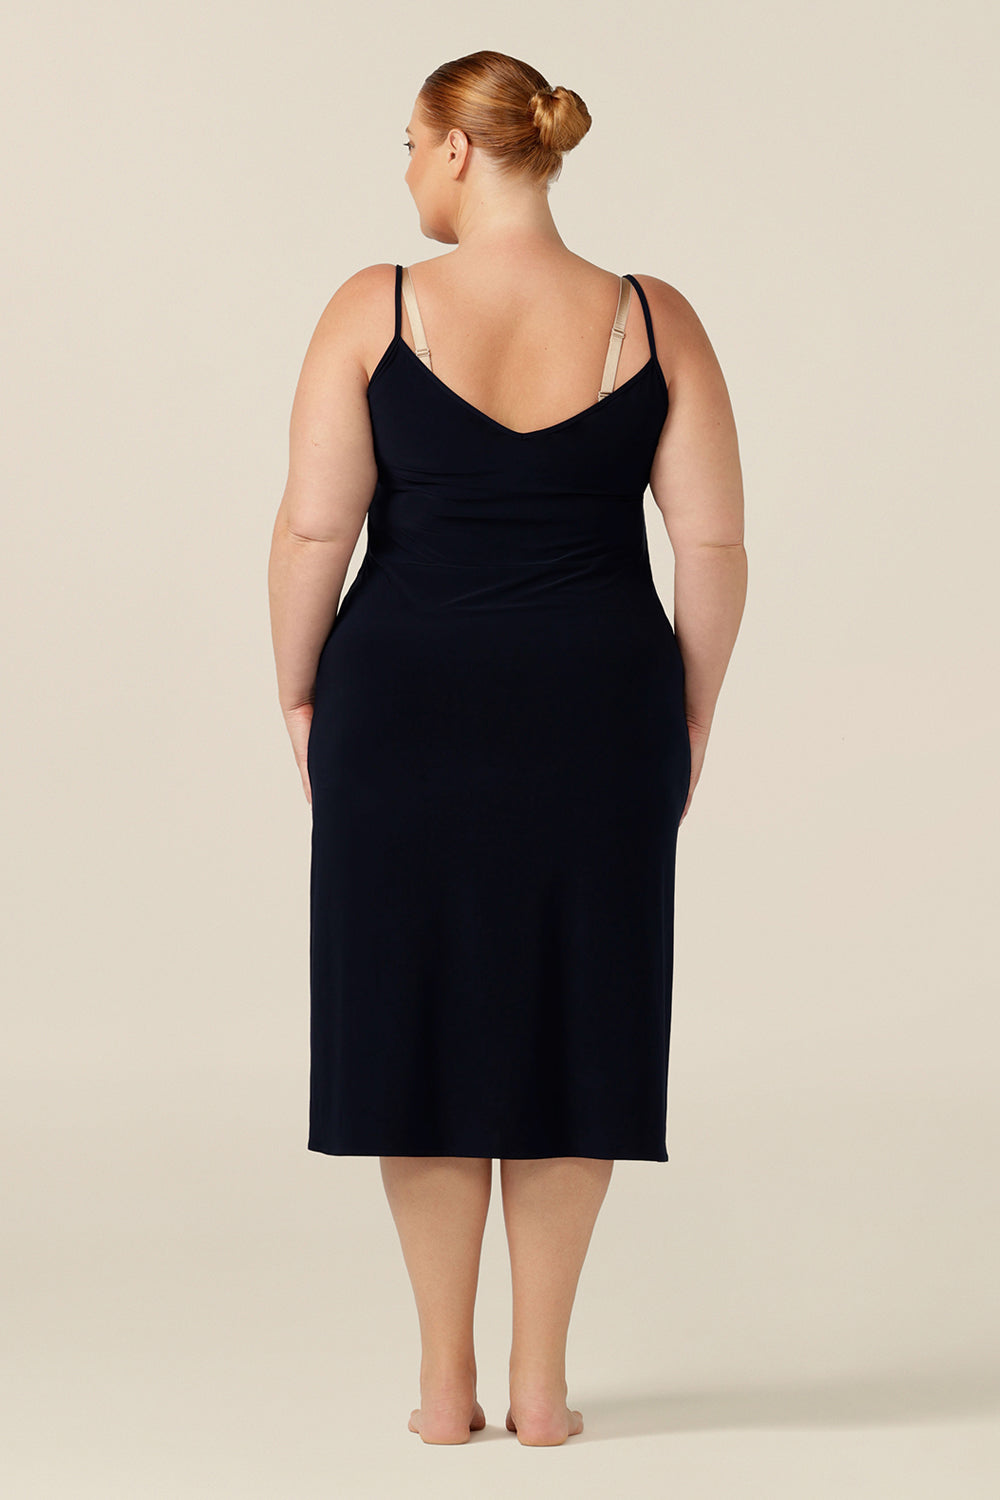 The ultimate smoothing undergarment, this midi-length, reversible, navy jersey slip is made-in-Australia in an inclusive 8 to 24 size range.